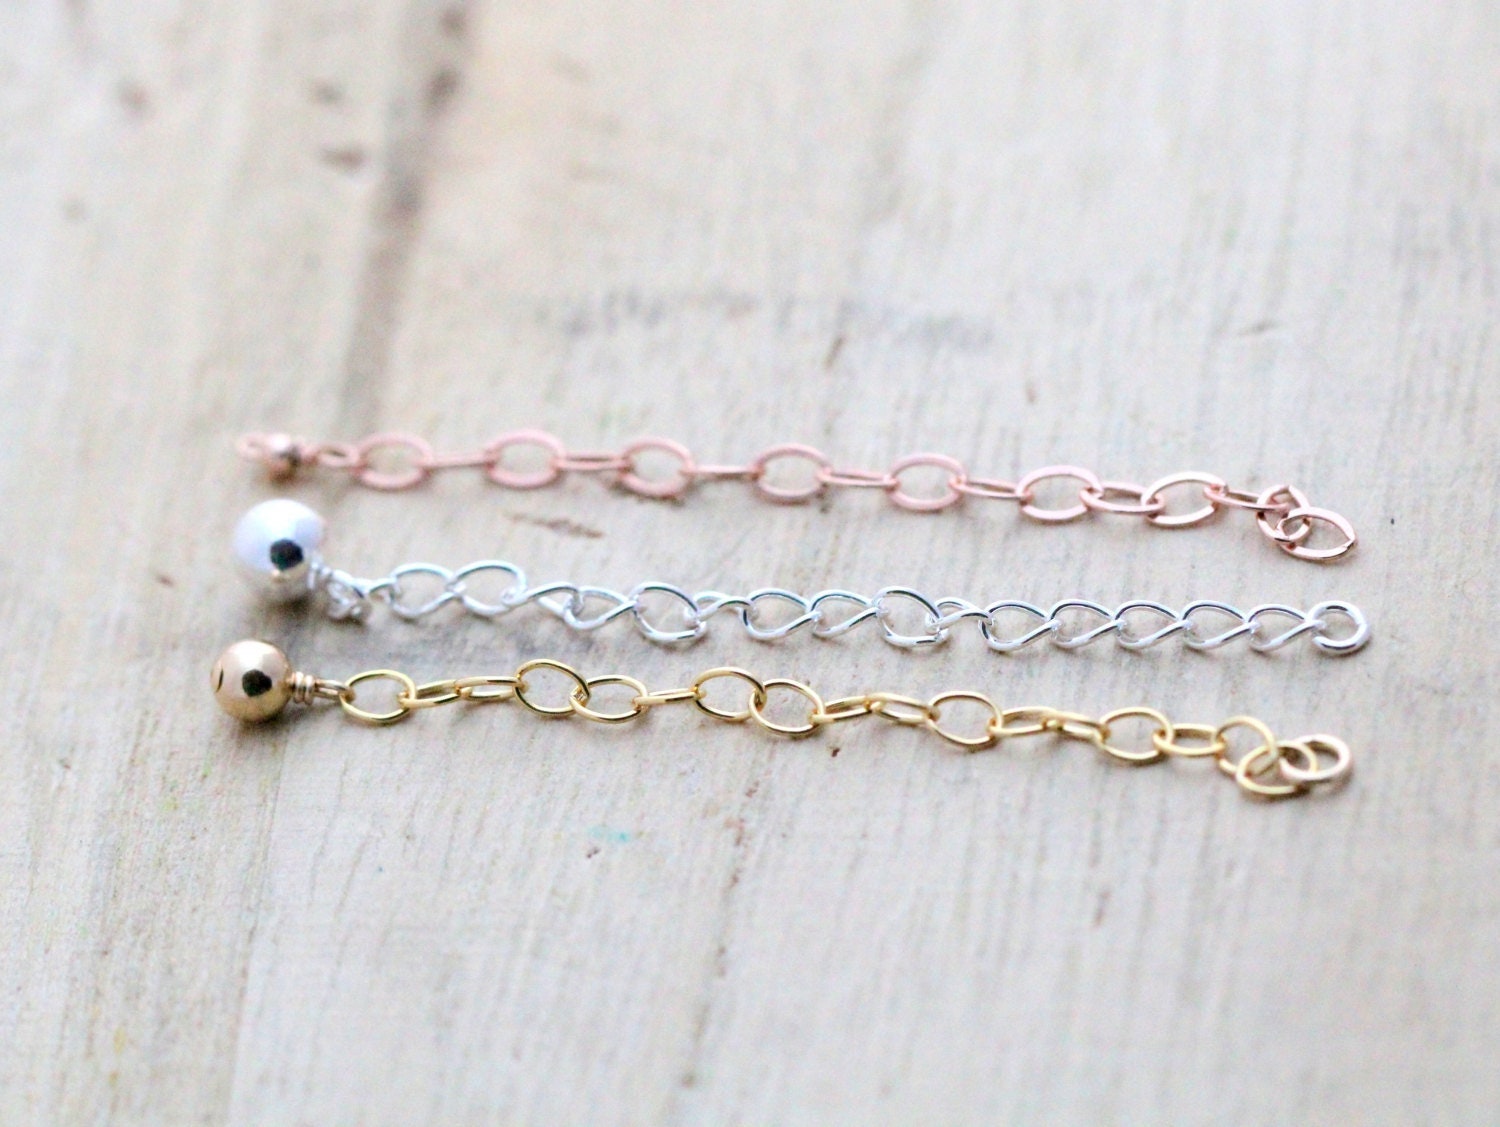 Extension Chain, Extender Chain, 14k Gold Filled, Sterling Silver, Rose  Gold Filled Chain Extenders for Necklace or Bracelet -  New Zealand